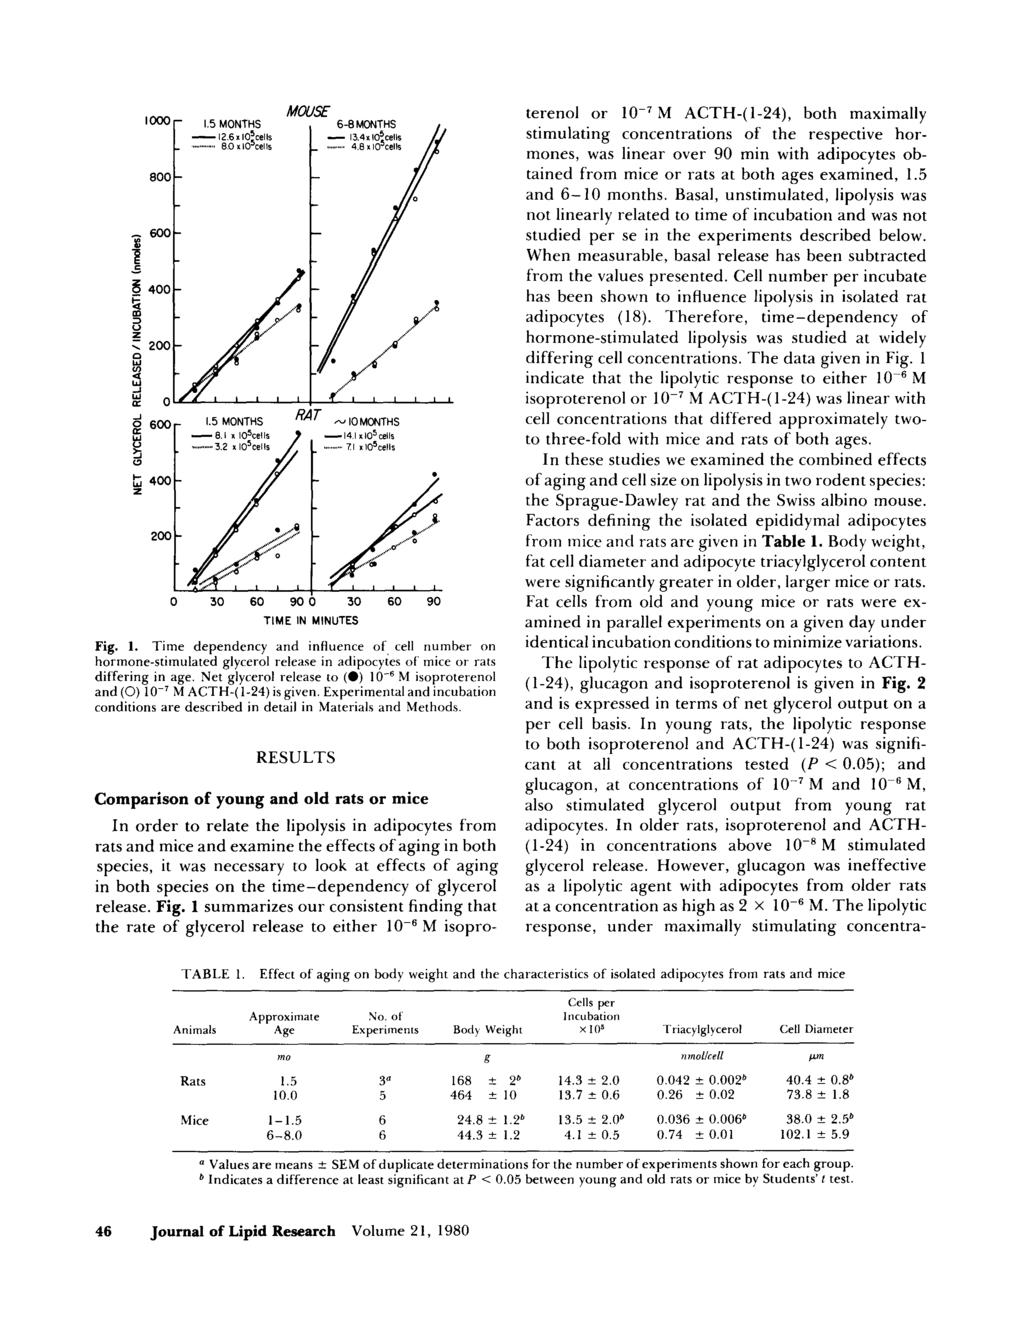 0 30 60 90 0 30 60 90 TIME IN MINUTES Fig. 1. Time dependency and inhuence of, cell number on hormone-stimulated glycerol release in adipocytes of mice or rats differing in age.